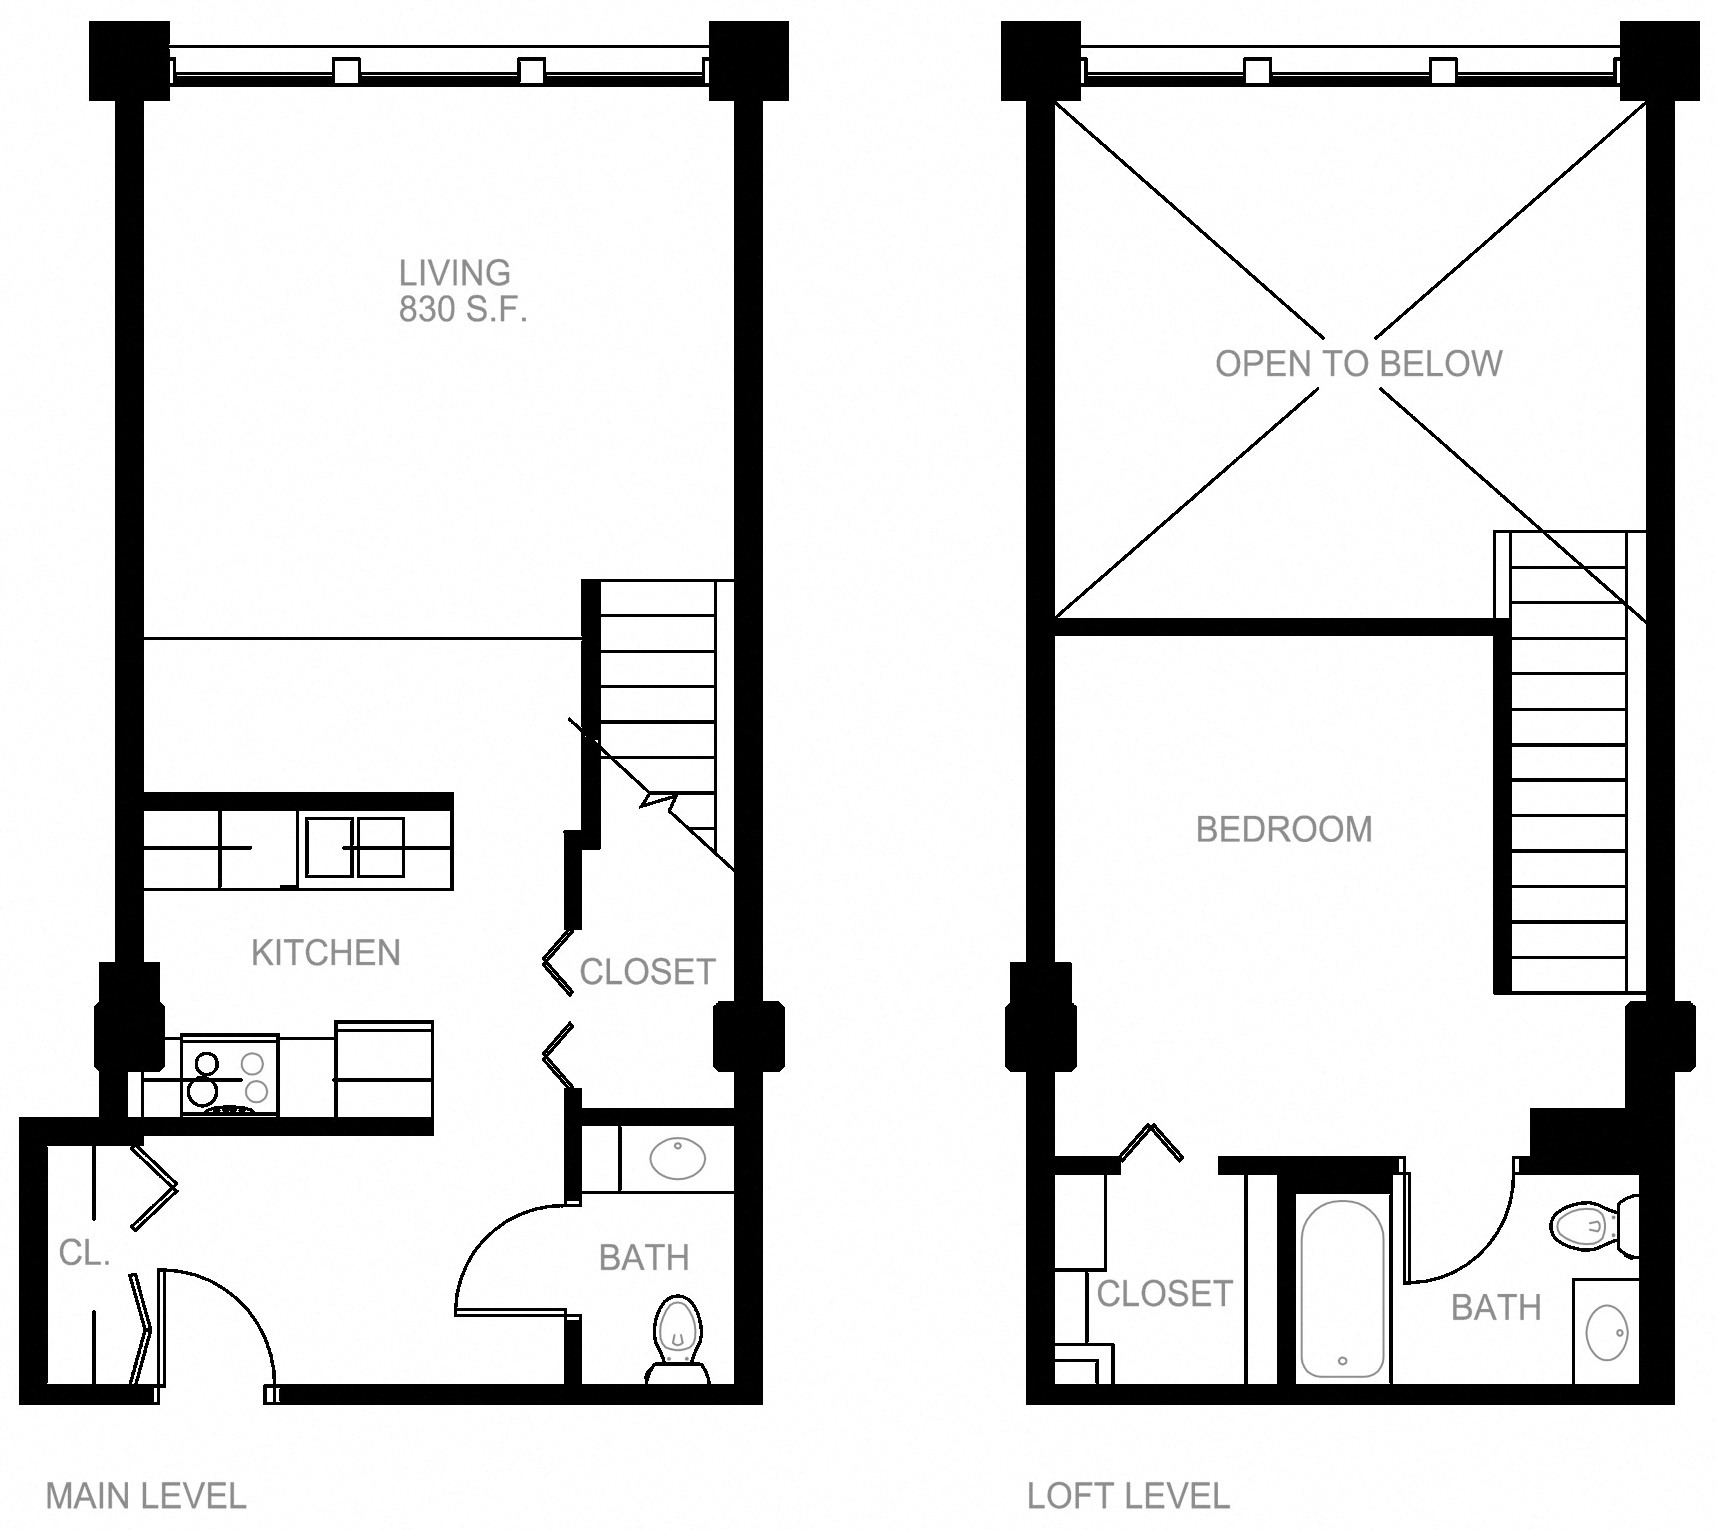 Floorplan for Apartment #P118, 1 bedroom unit at Halstead Providence